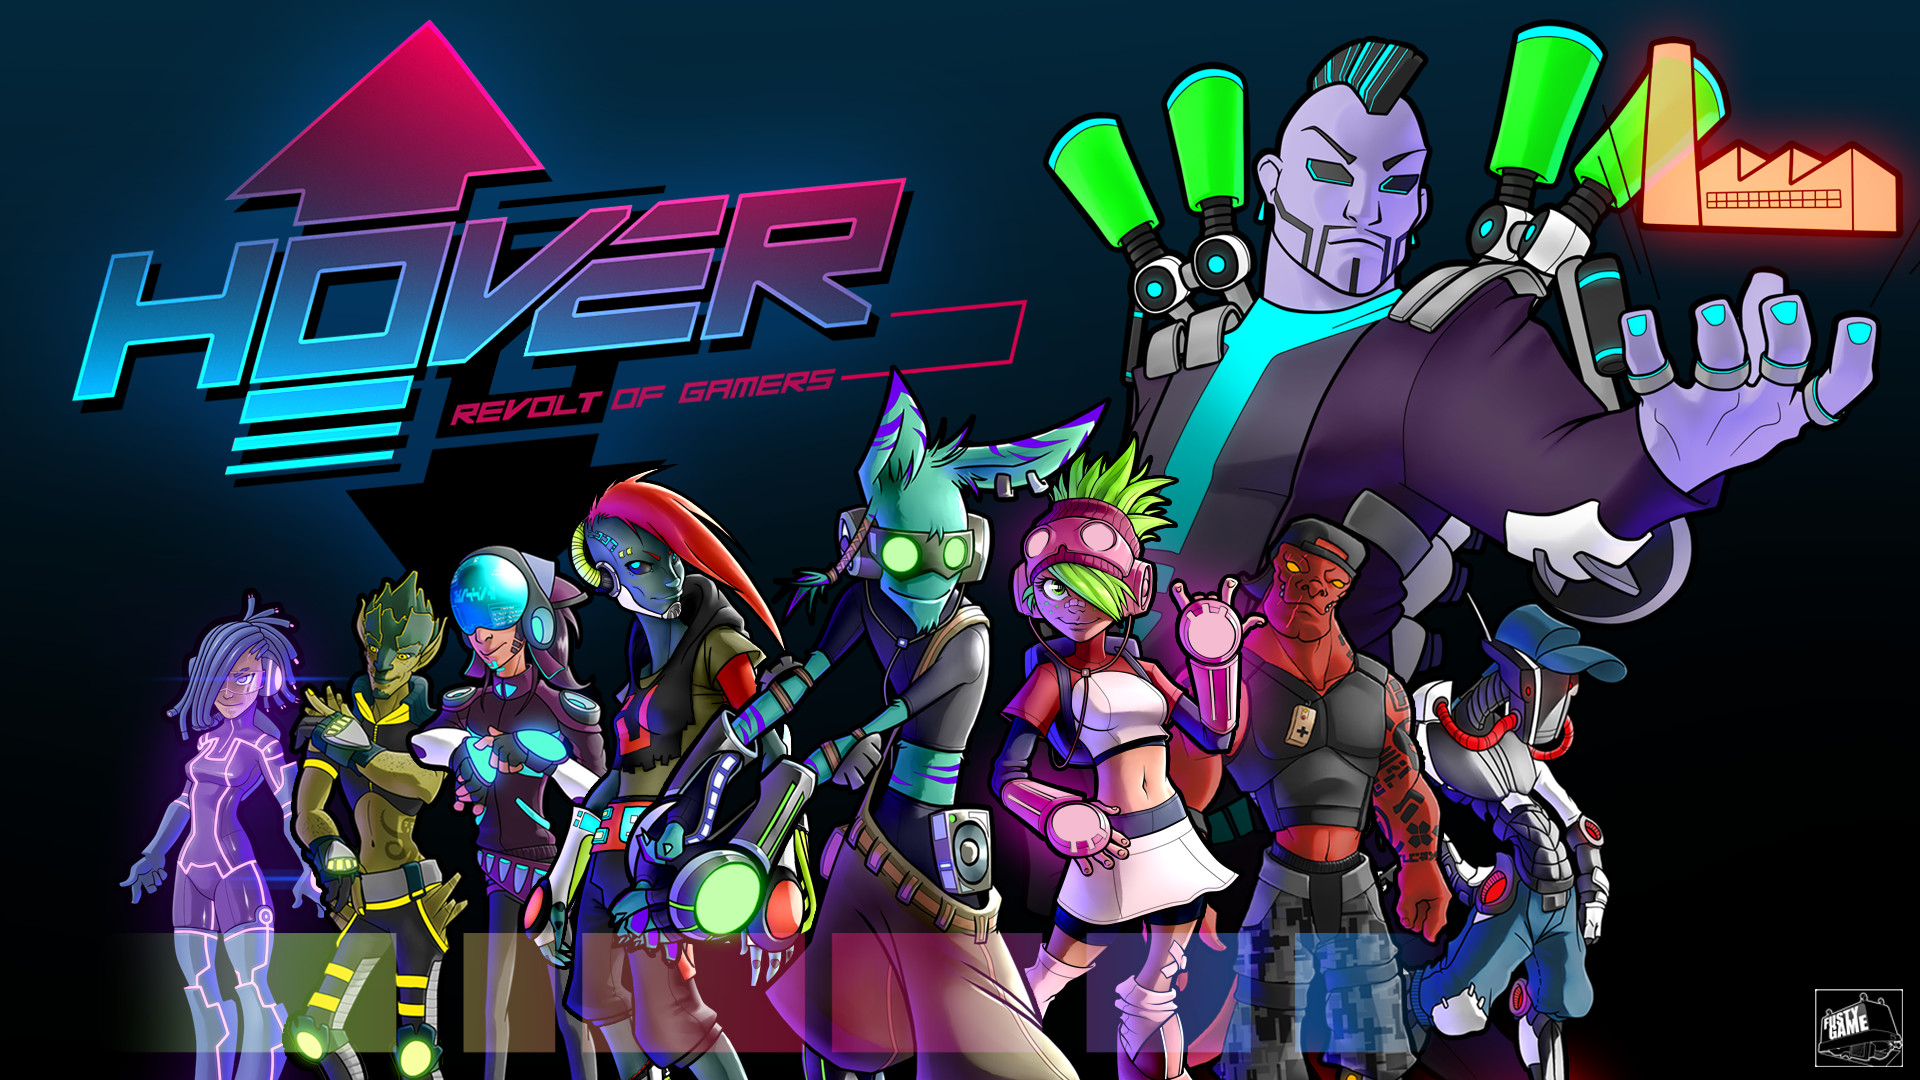 1920x1080 ... “Hover: Revolt of Gamers” is a futuristic 3D parkour game in an  openworld. Halfway between the crazy universe from Jet Set Radio, the  interactivity ...